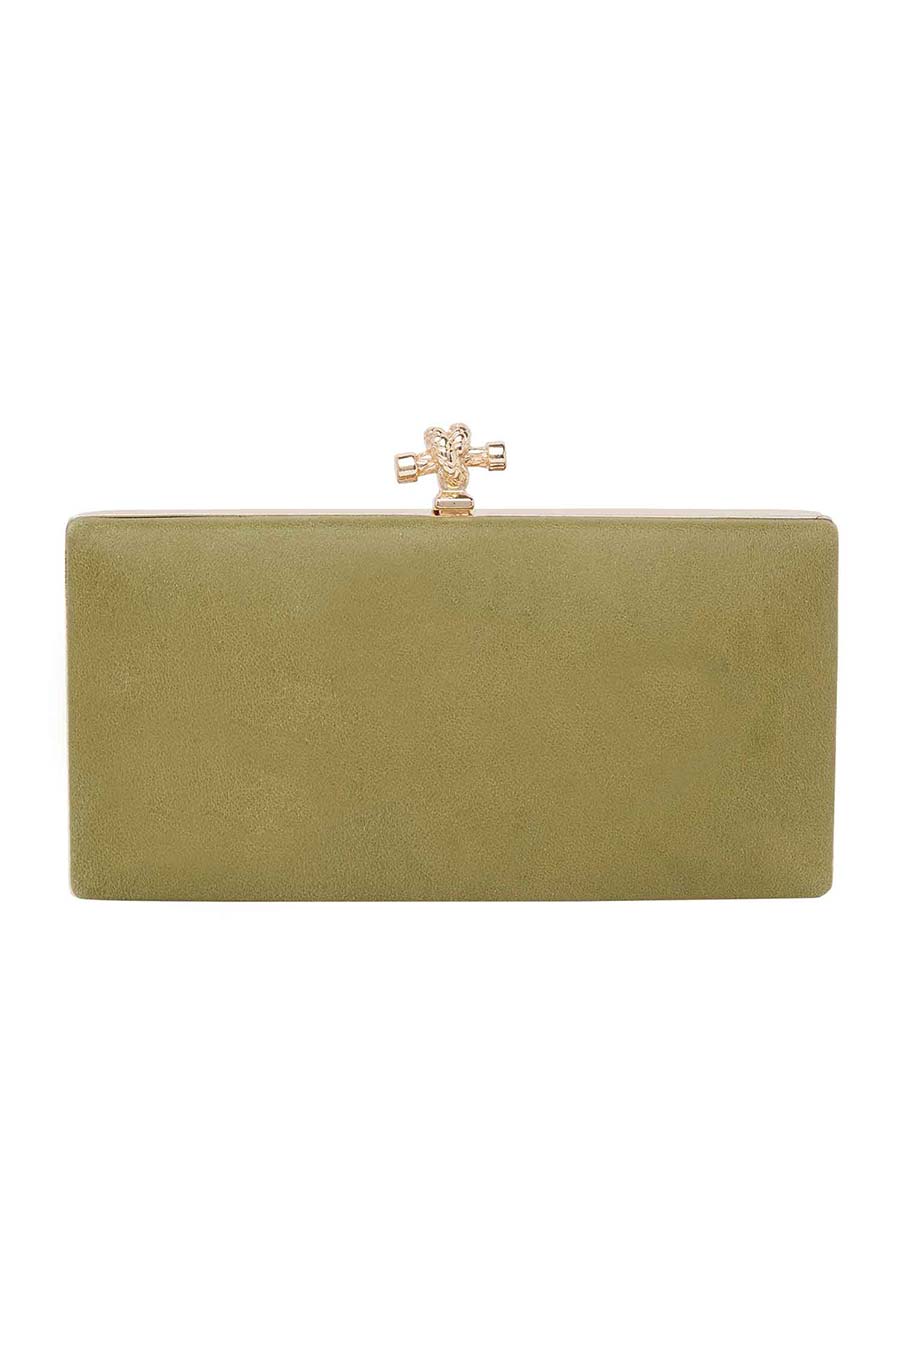 Green Two Sided Leather Clutch